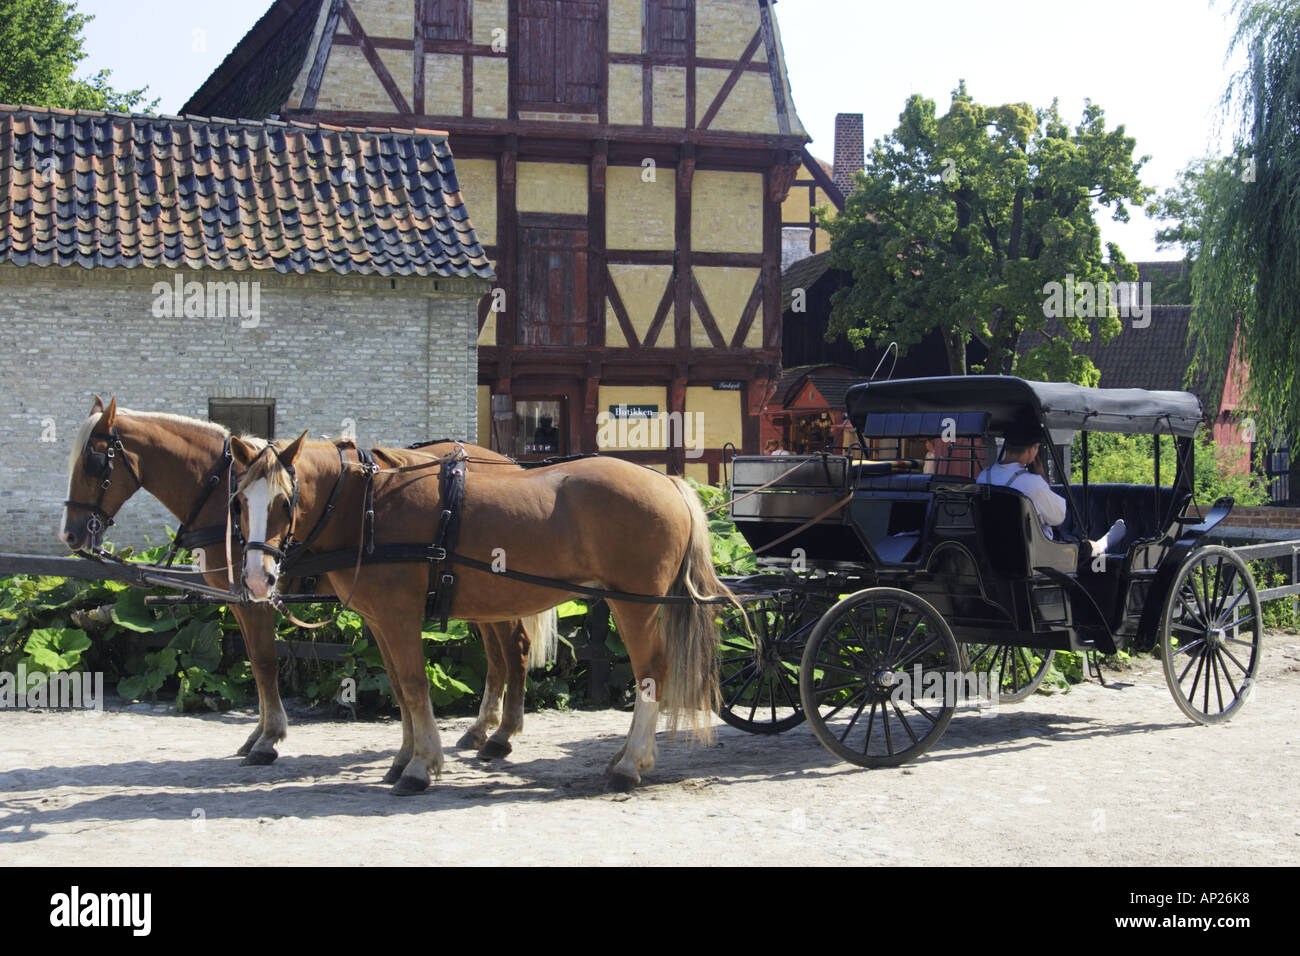 Horse drawn carriage in the Old Town Museum Den Gamle By, Arhus Denmark Stock Photo